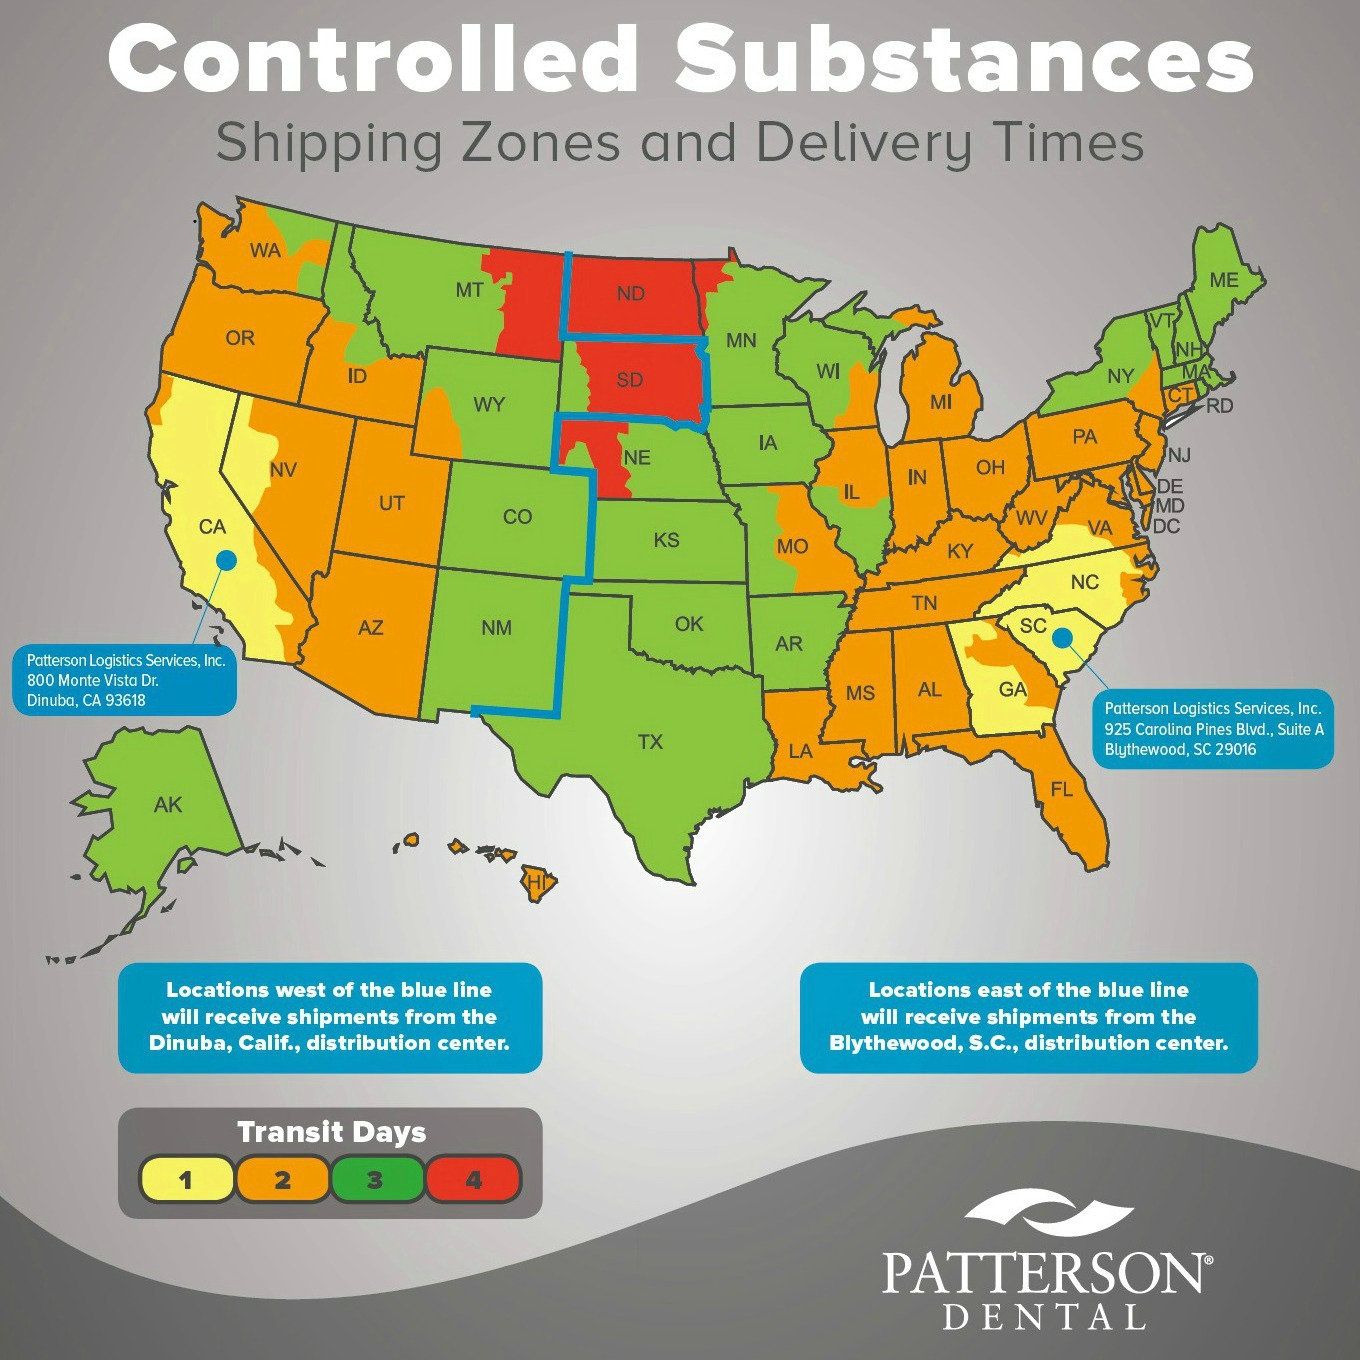 Controlled Substances 101 - Off The Cusp